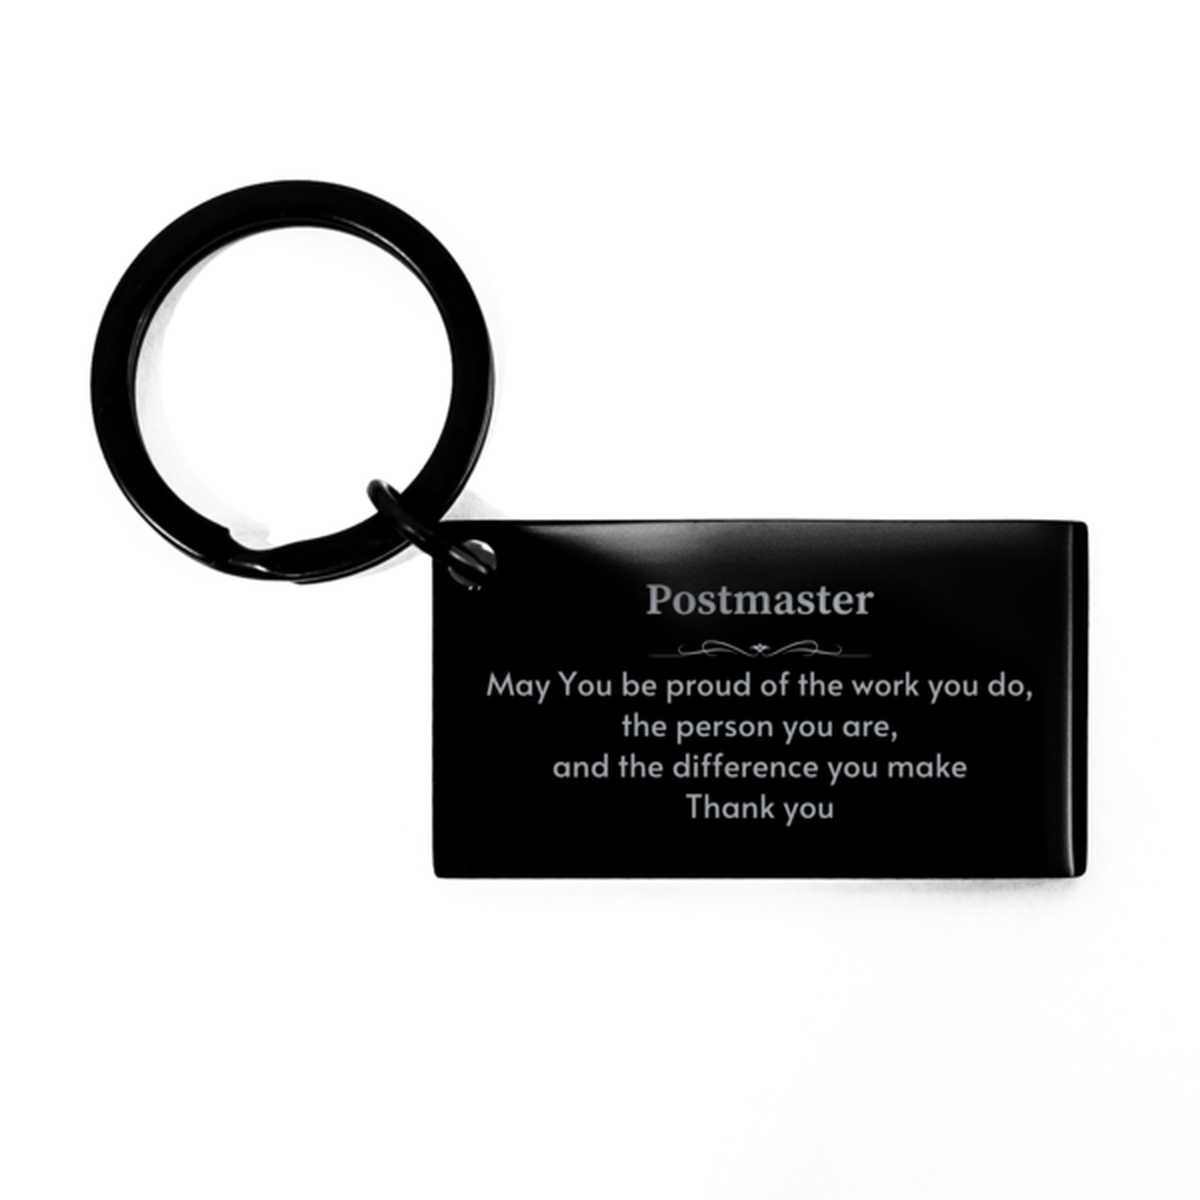 Heartwarming Keychain Retirement Coworkers Gifts for Postmaster, Senator May You be proud of the work you do, the person you are Gifts for Boss Men Women Friends